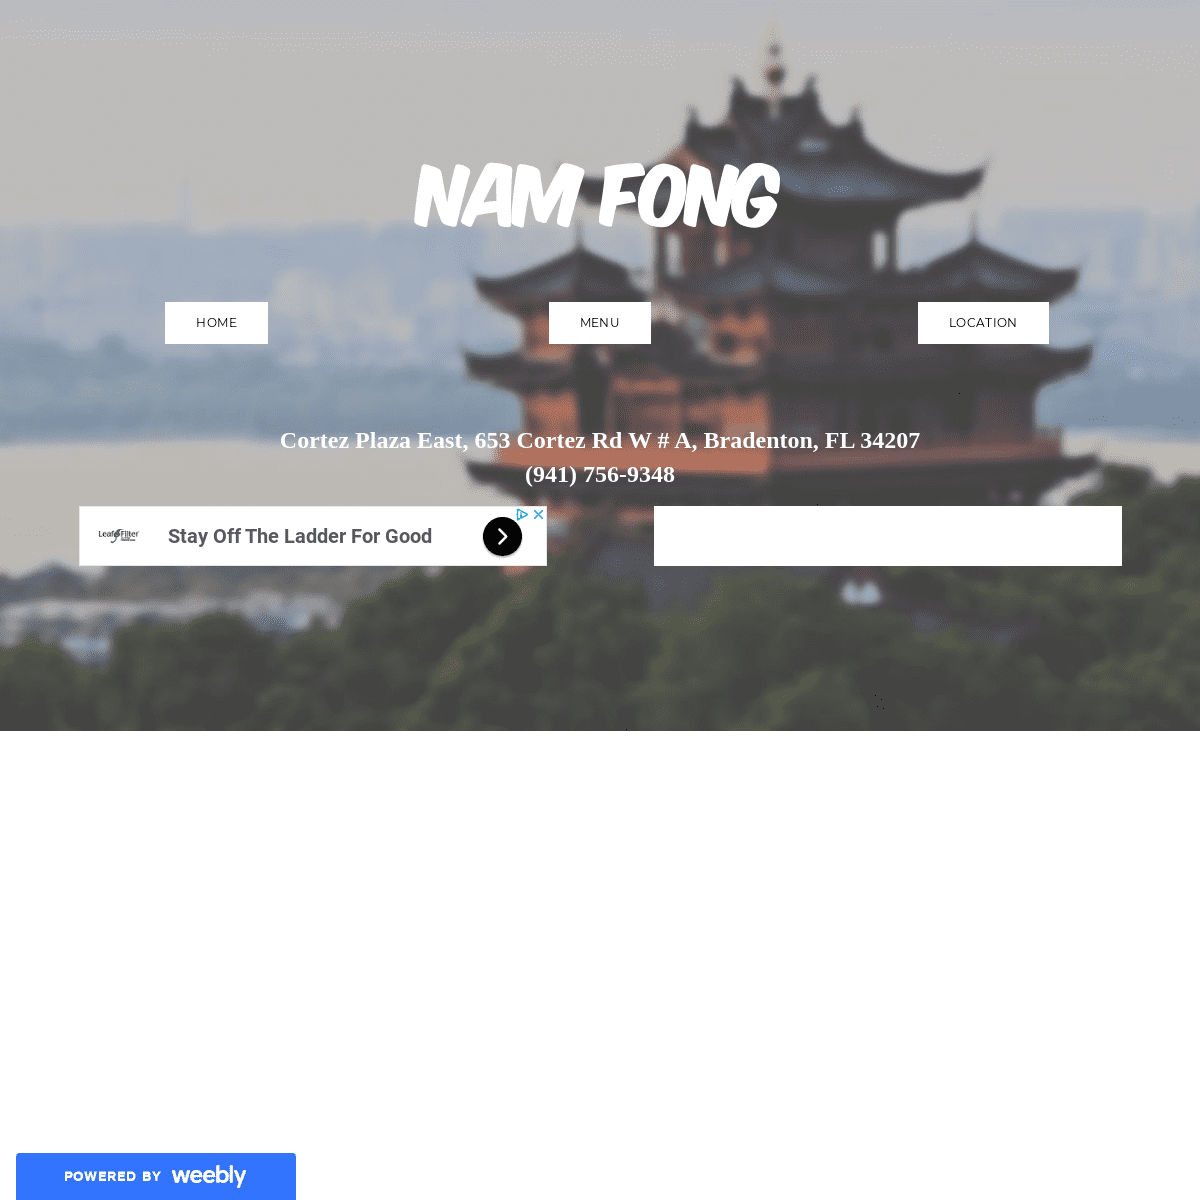 A complete backup of http://namfong.weebly.com/